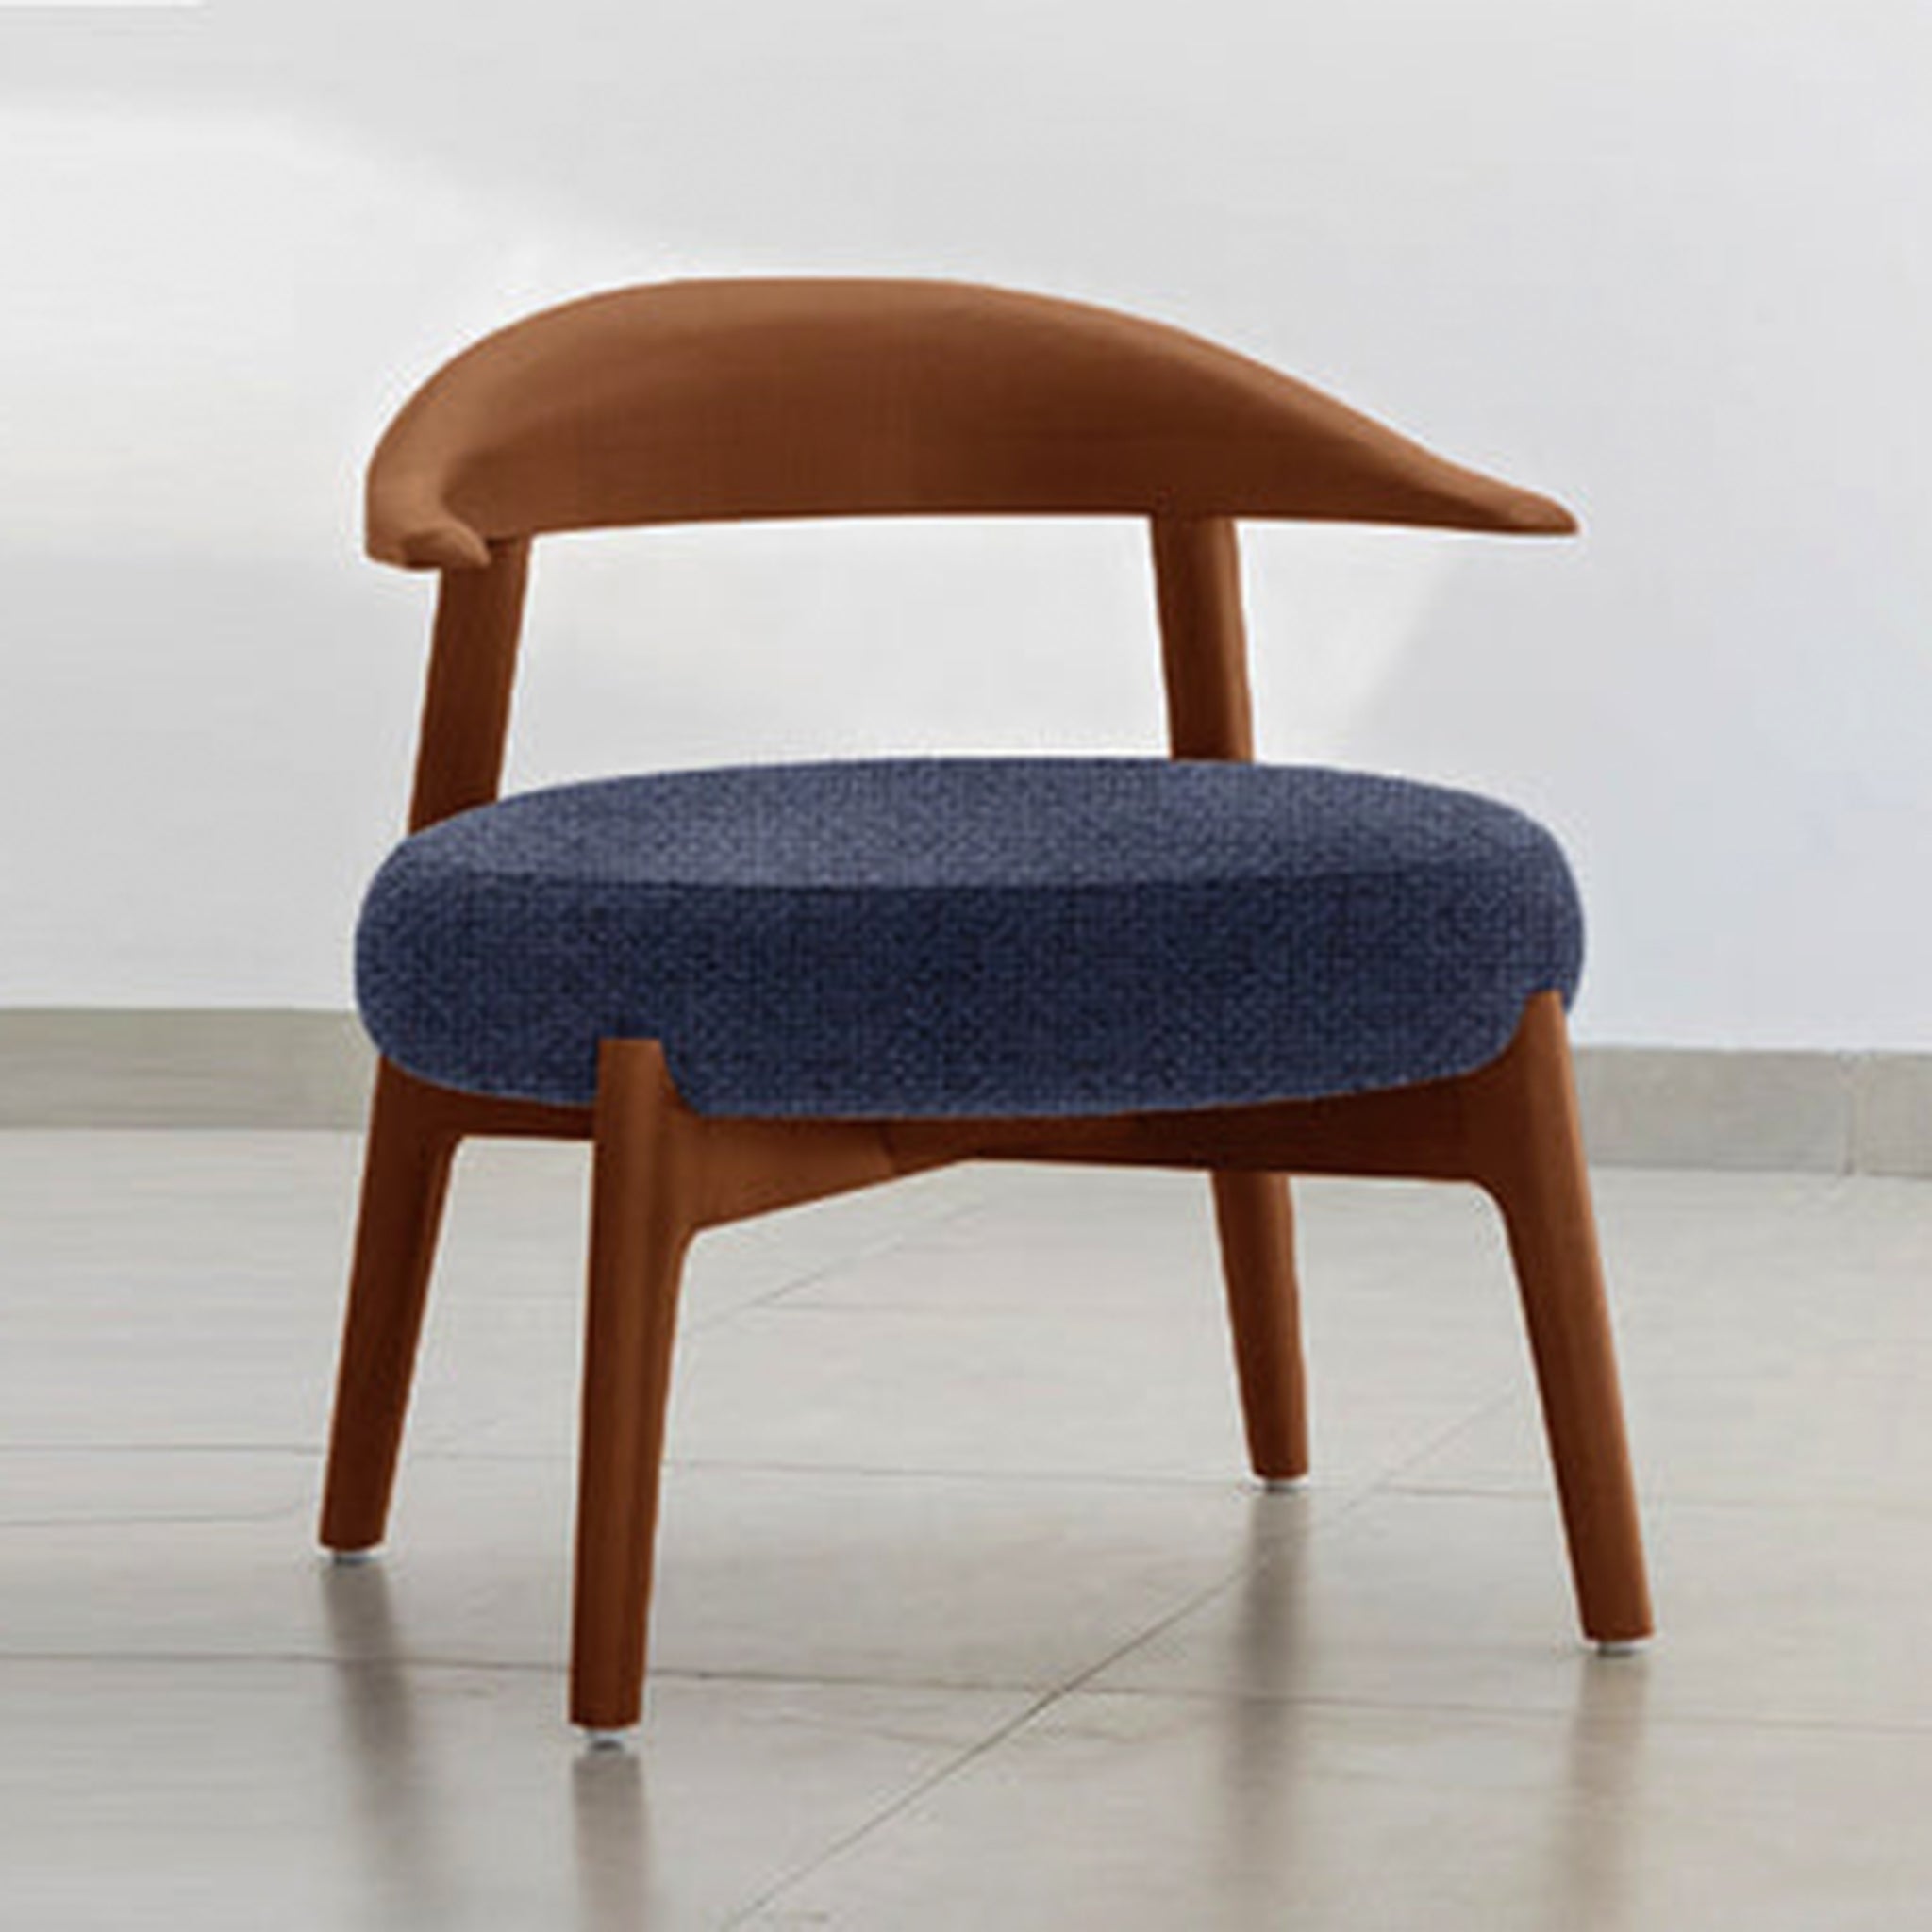 "Elegant and modern Hyde Accent Chair for stylish interiors"